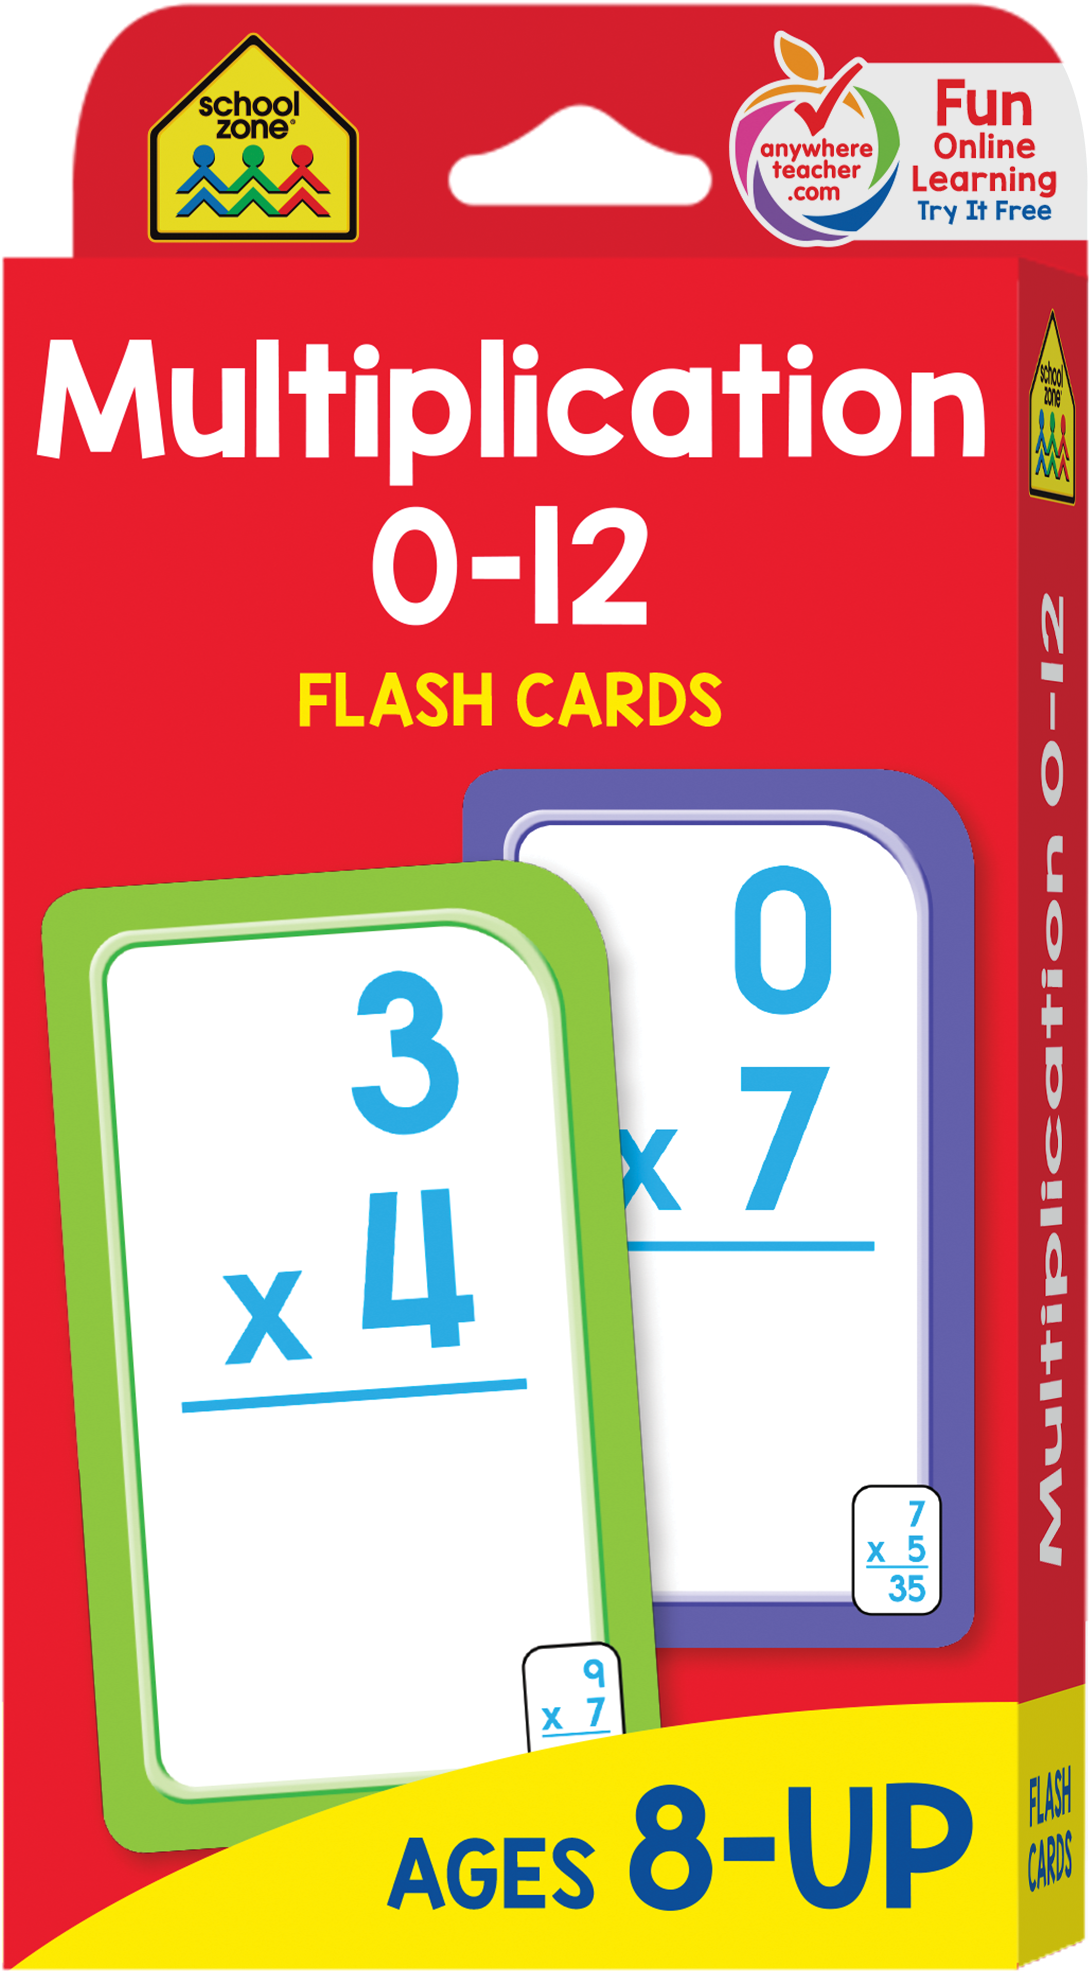 A Red Box With A Red Background And A Red Box With A Red Cover With A Red And Green Rectangular Box With White Text And Numbers On It